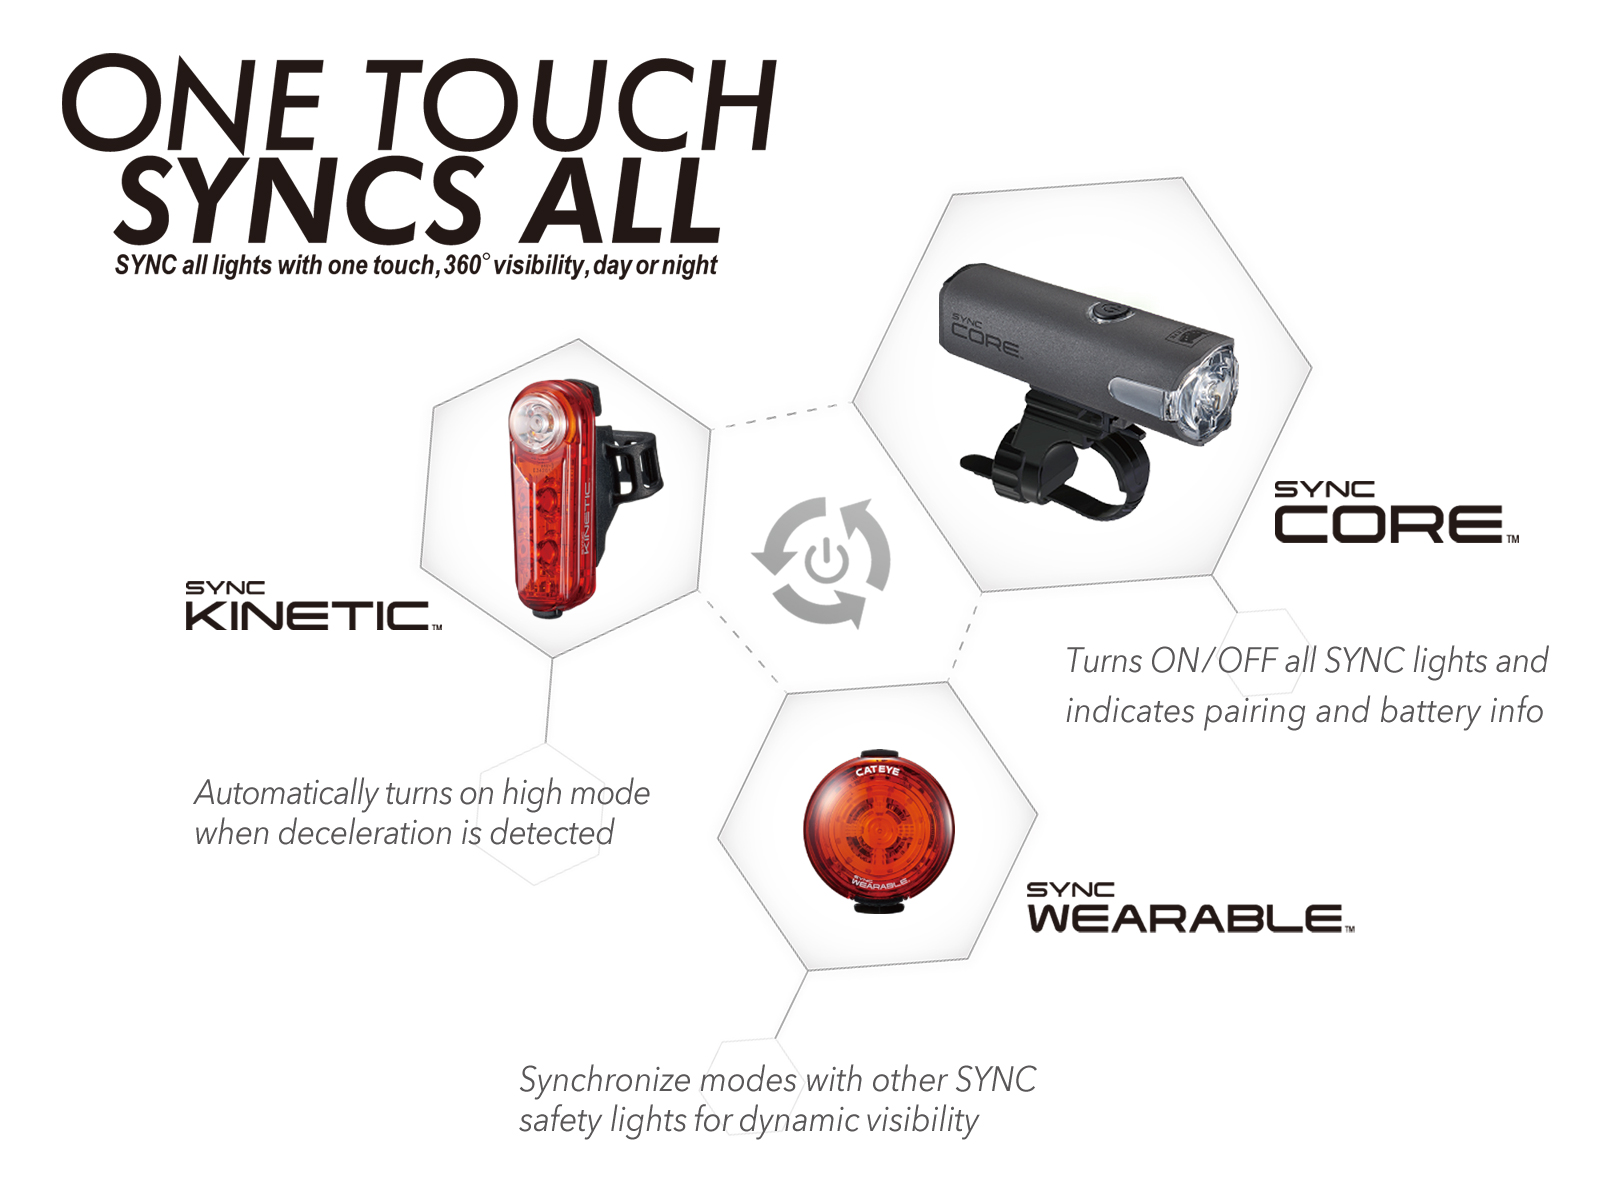 One touch syncs all